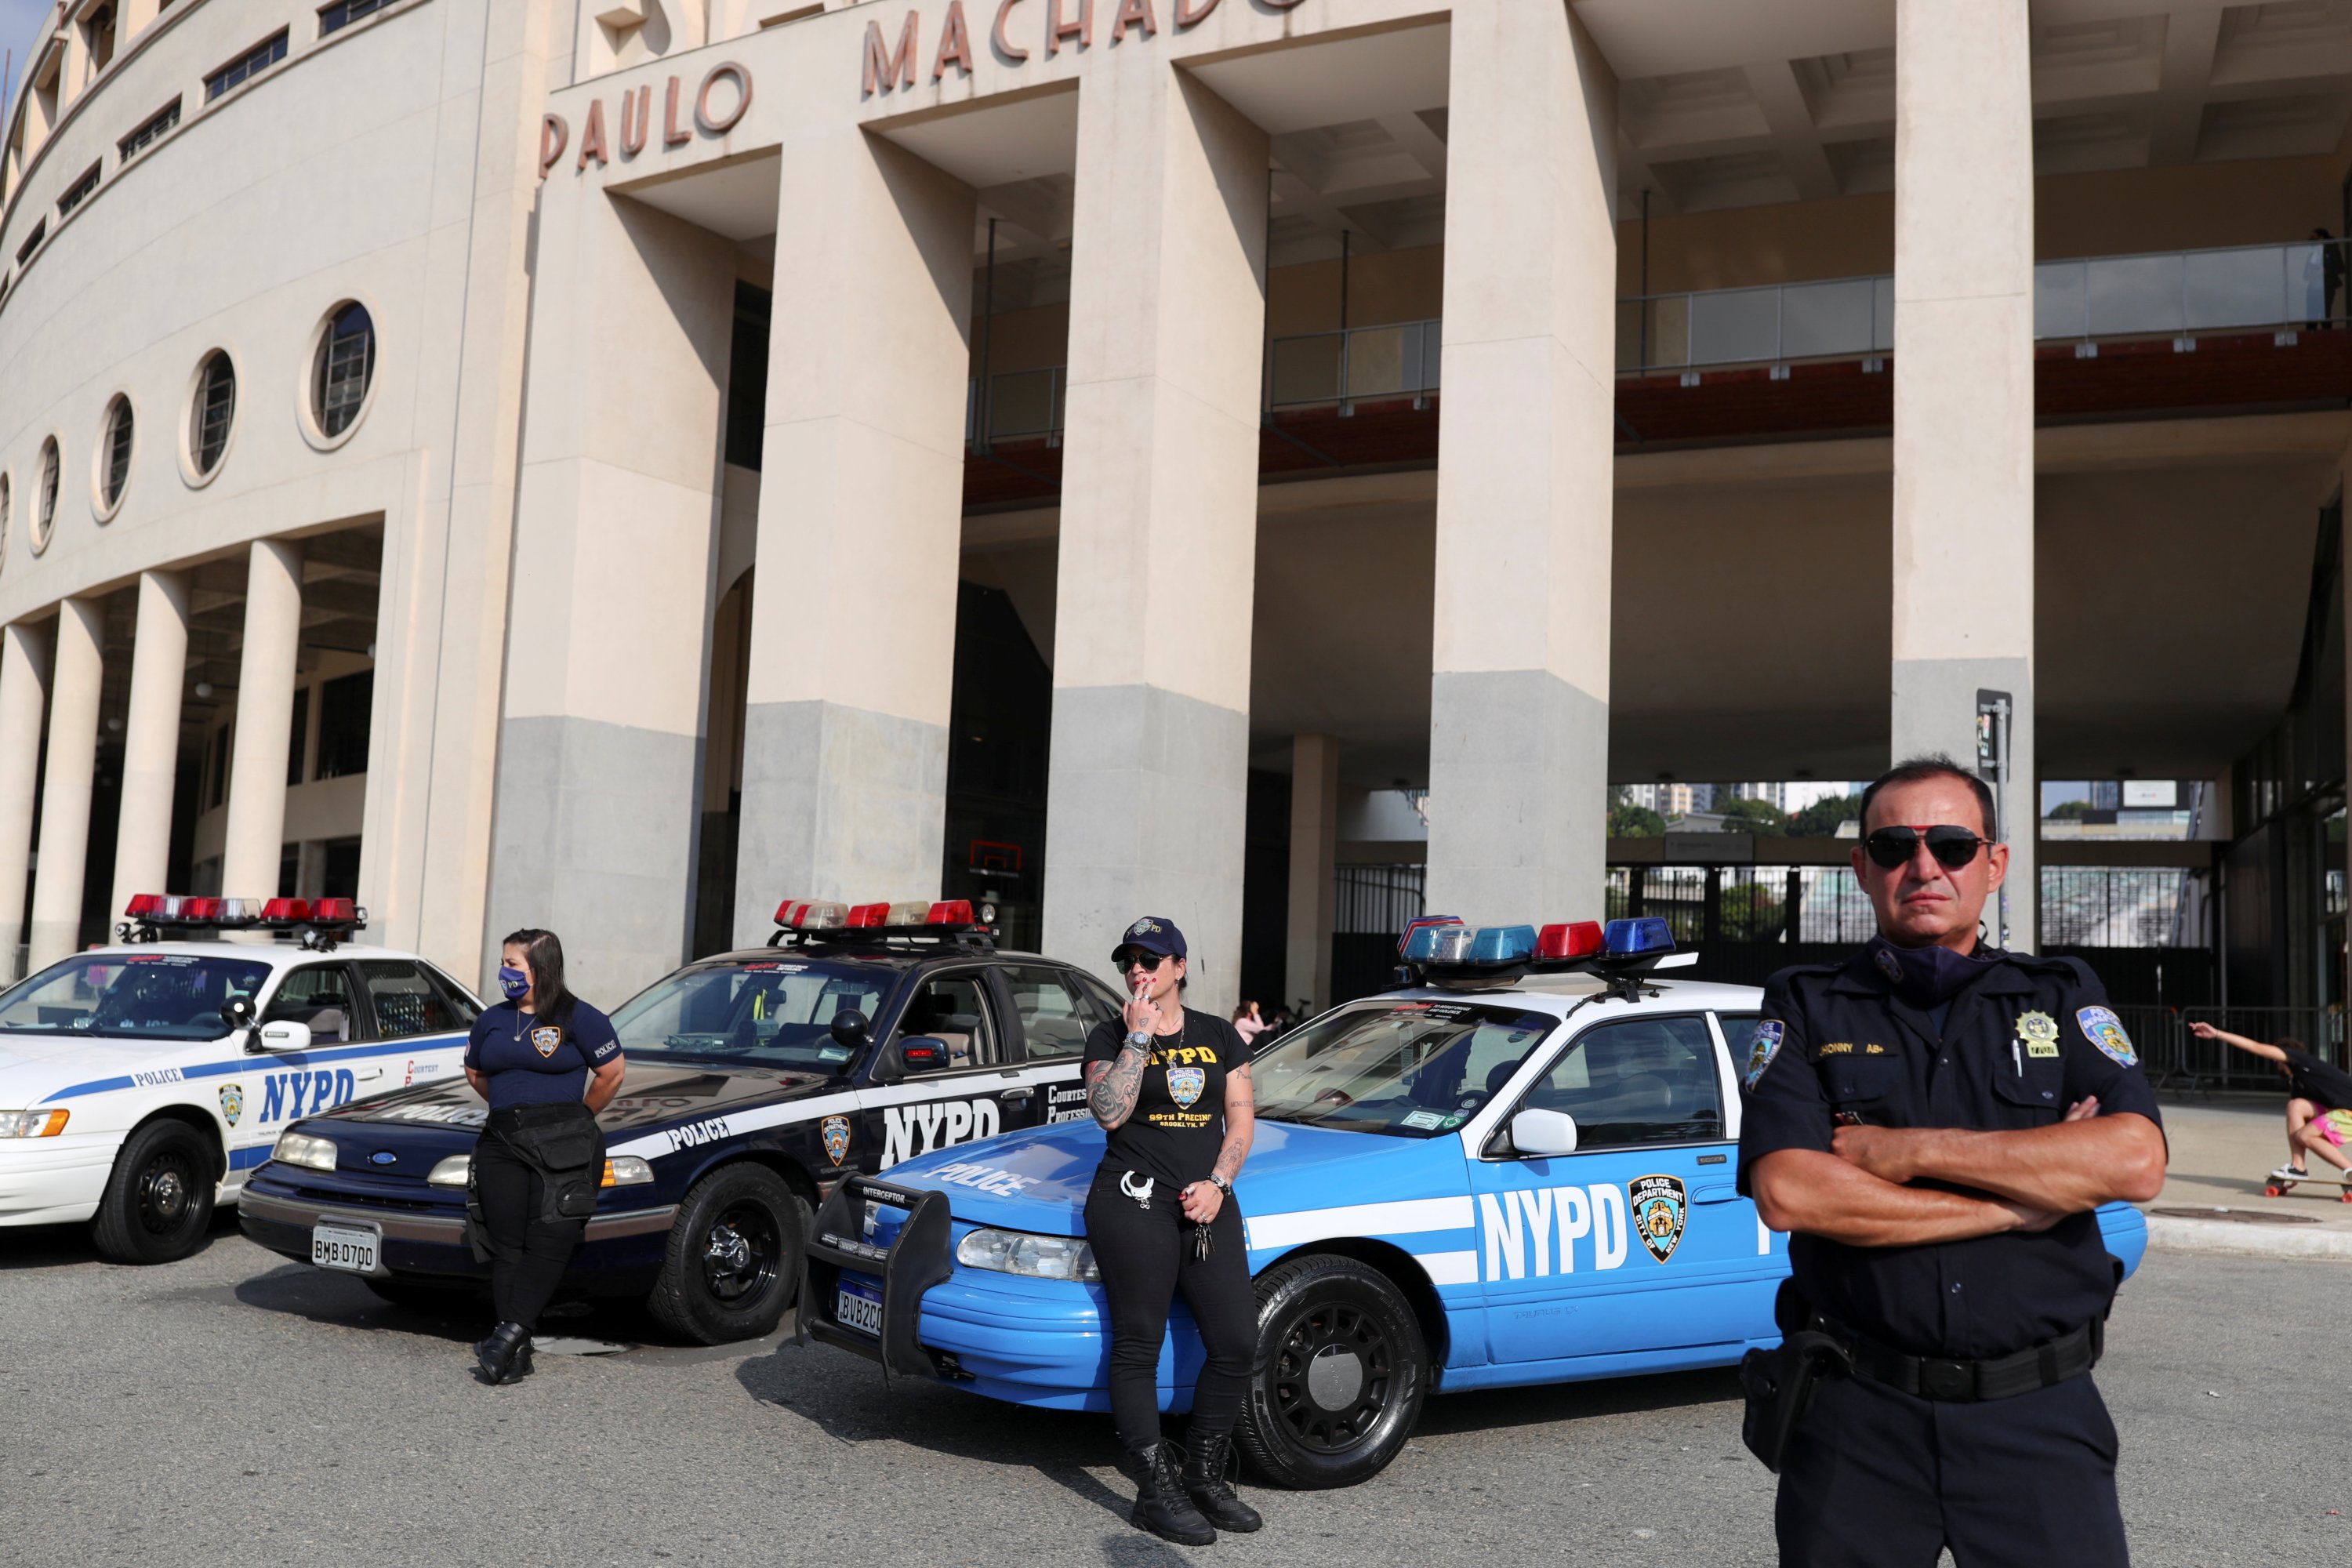 Brazilian fans of the New York Police Department (NYPD) Mariani Morandi, Michelle Grasso and Jhonny Brito stand in front of Pacaembu Stadium in Sao Paulo, Brazil, May 16, 2021. (Reuters Photo)